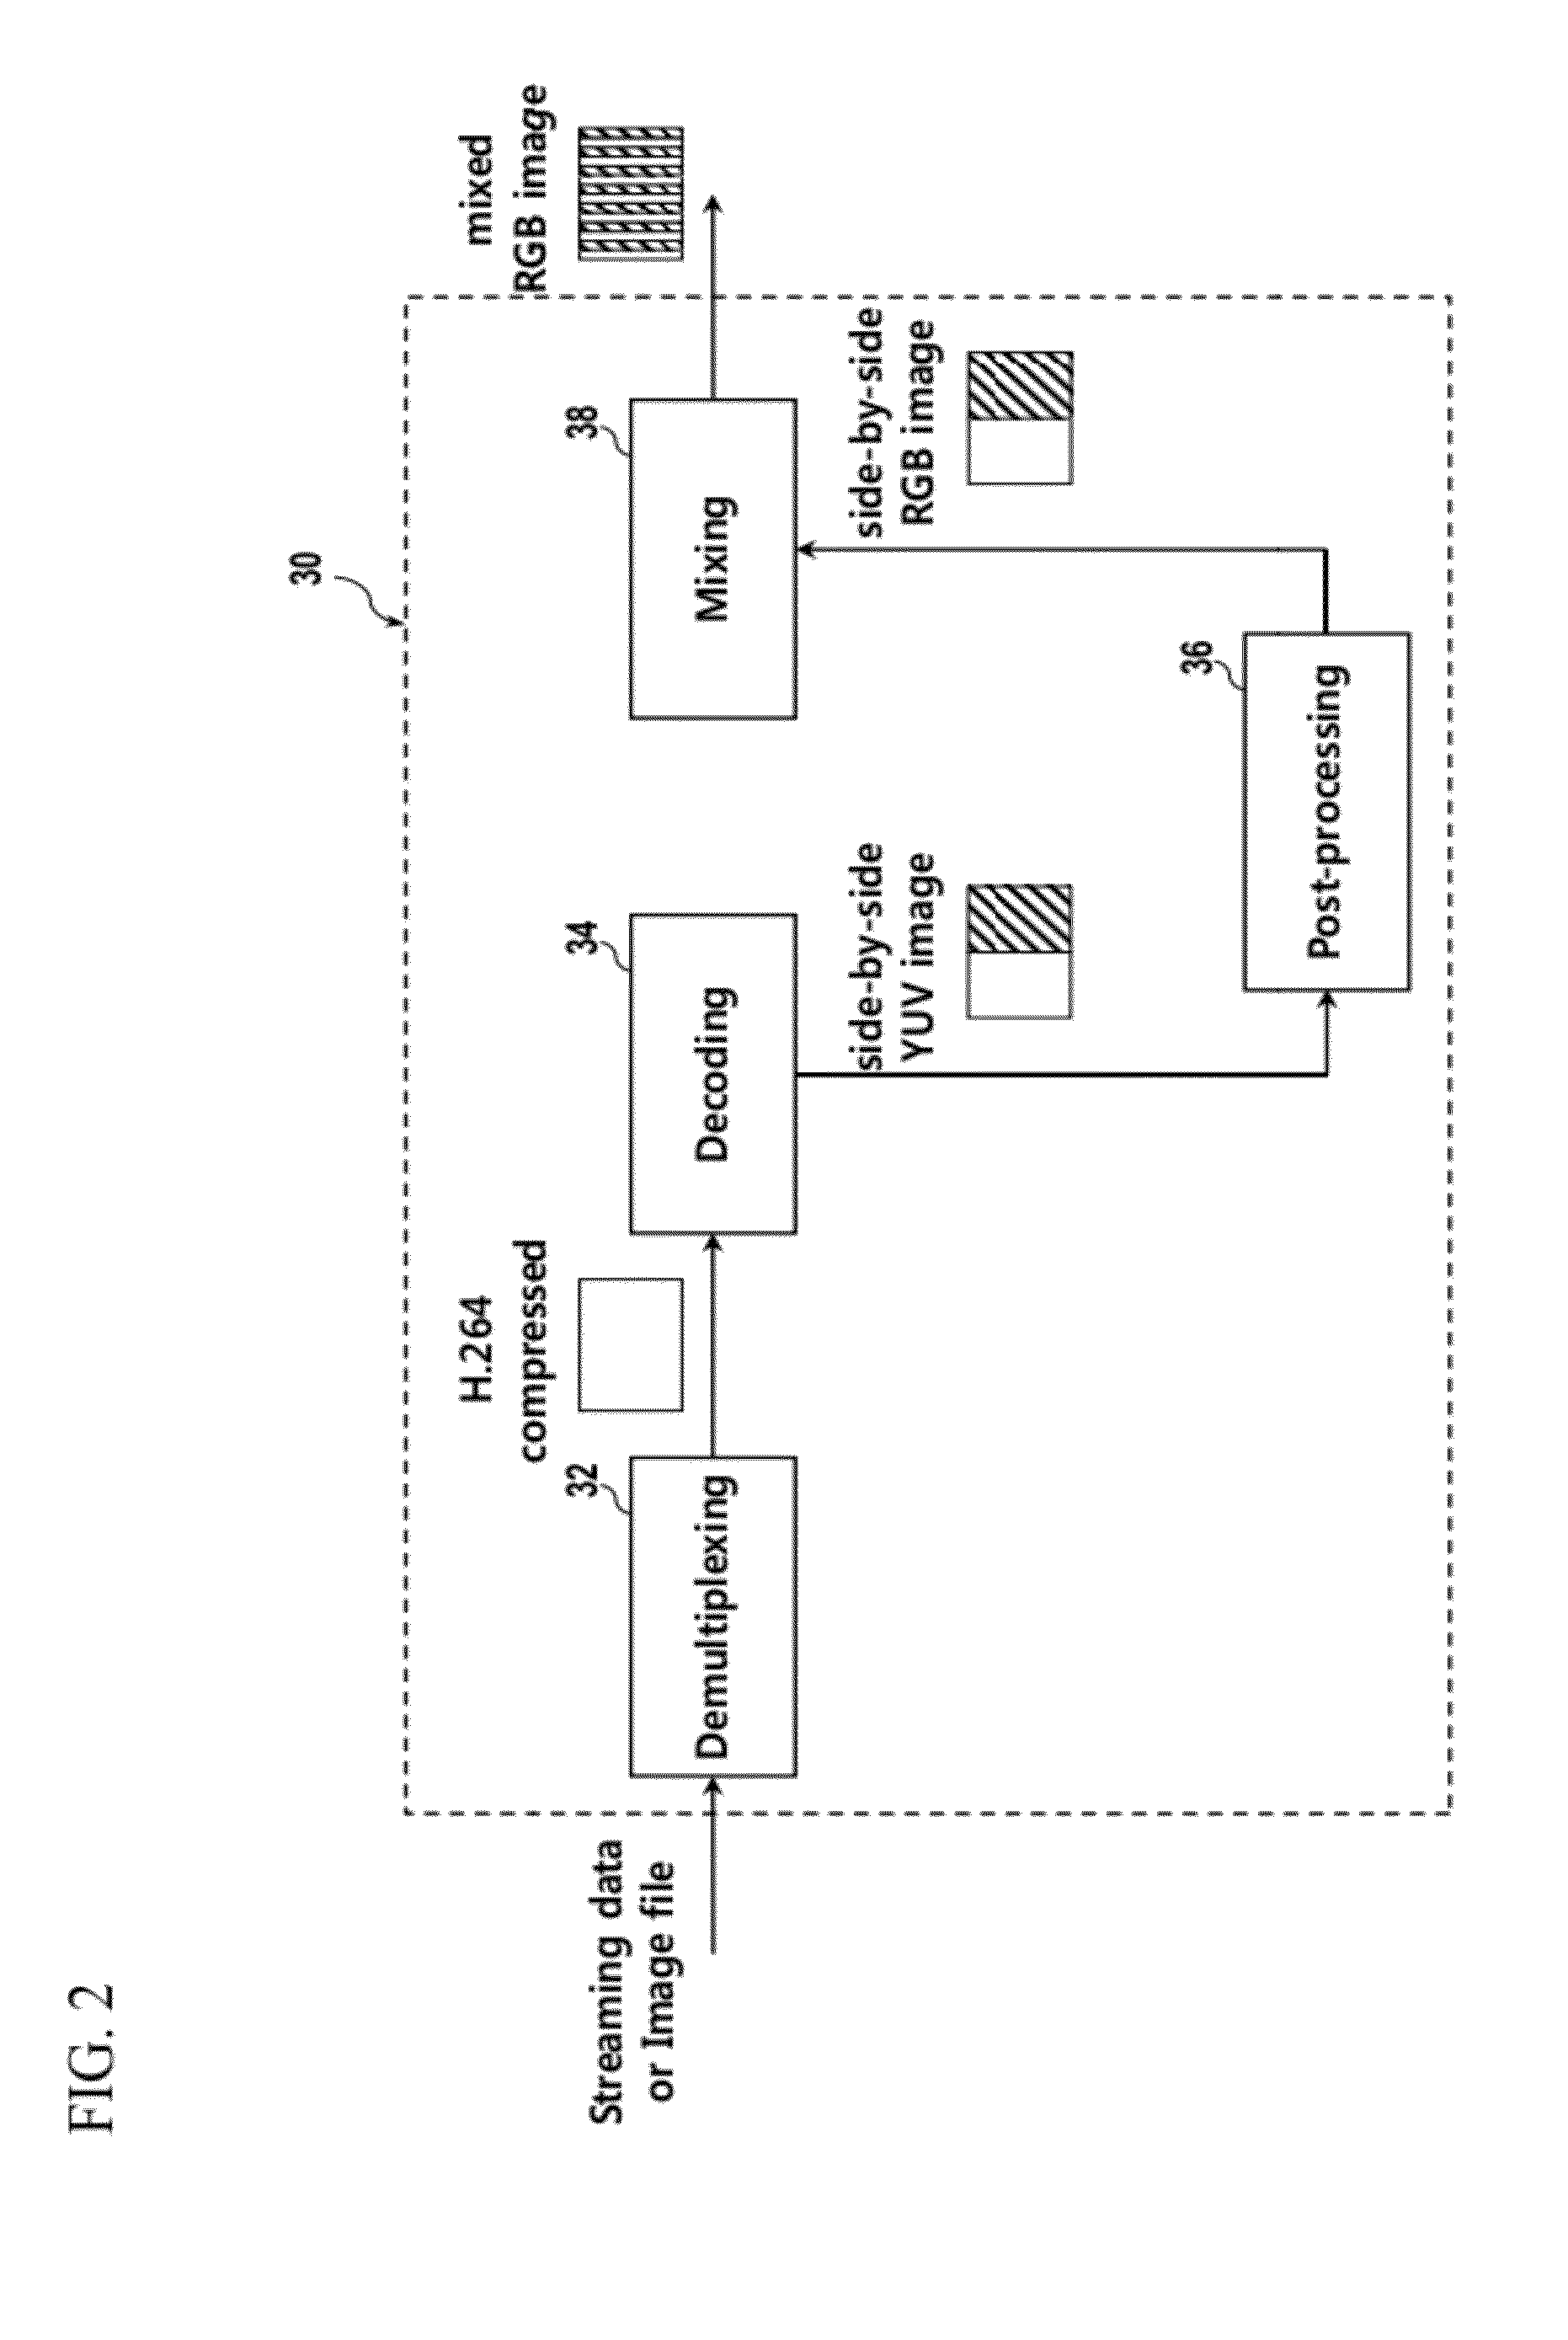 3D image processing method and portable 3D display apparatus implementing the same